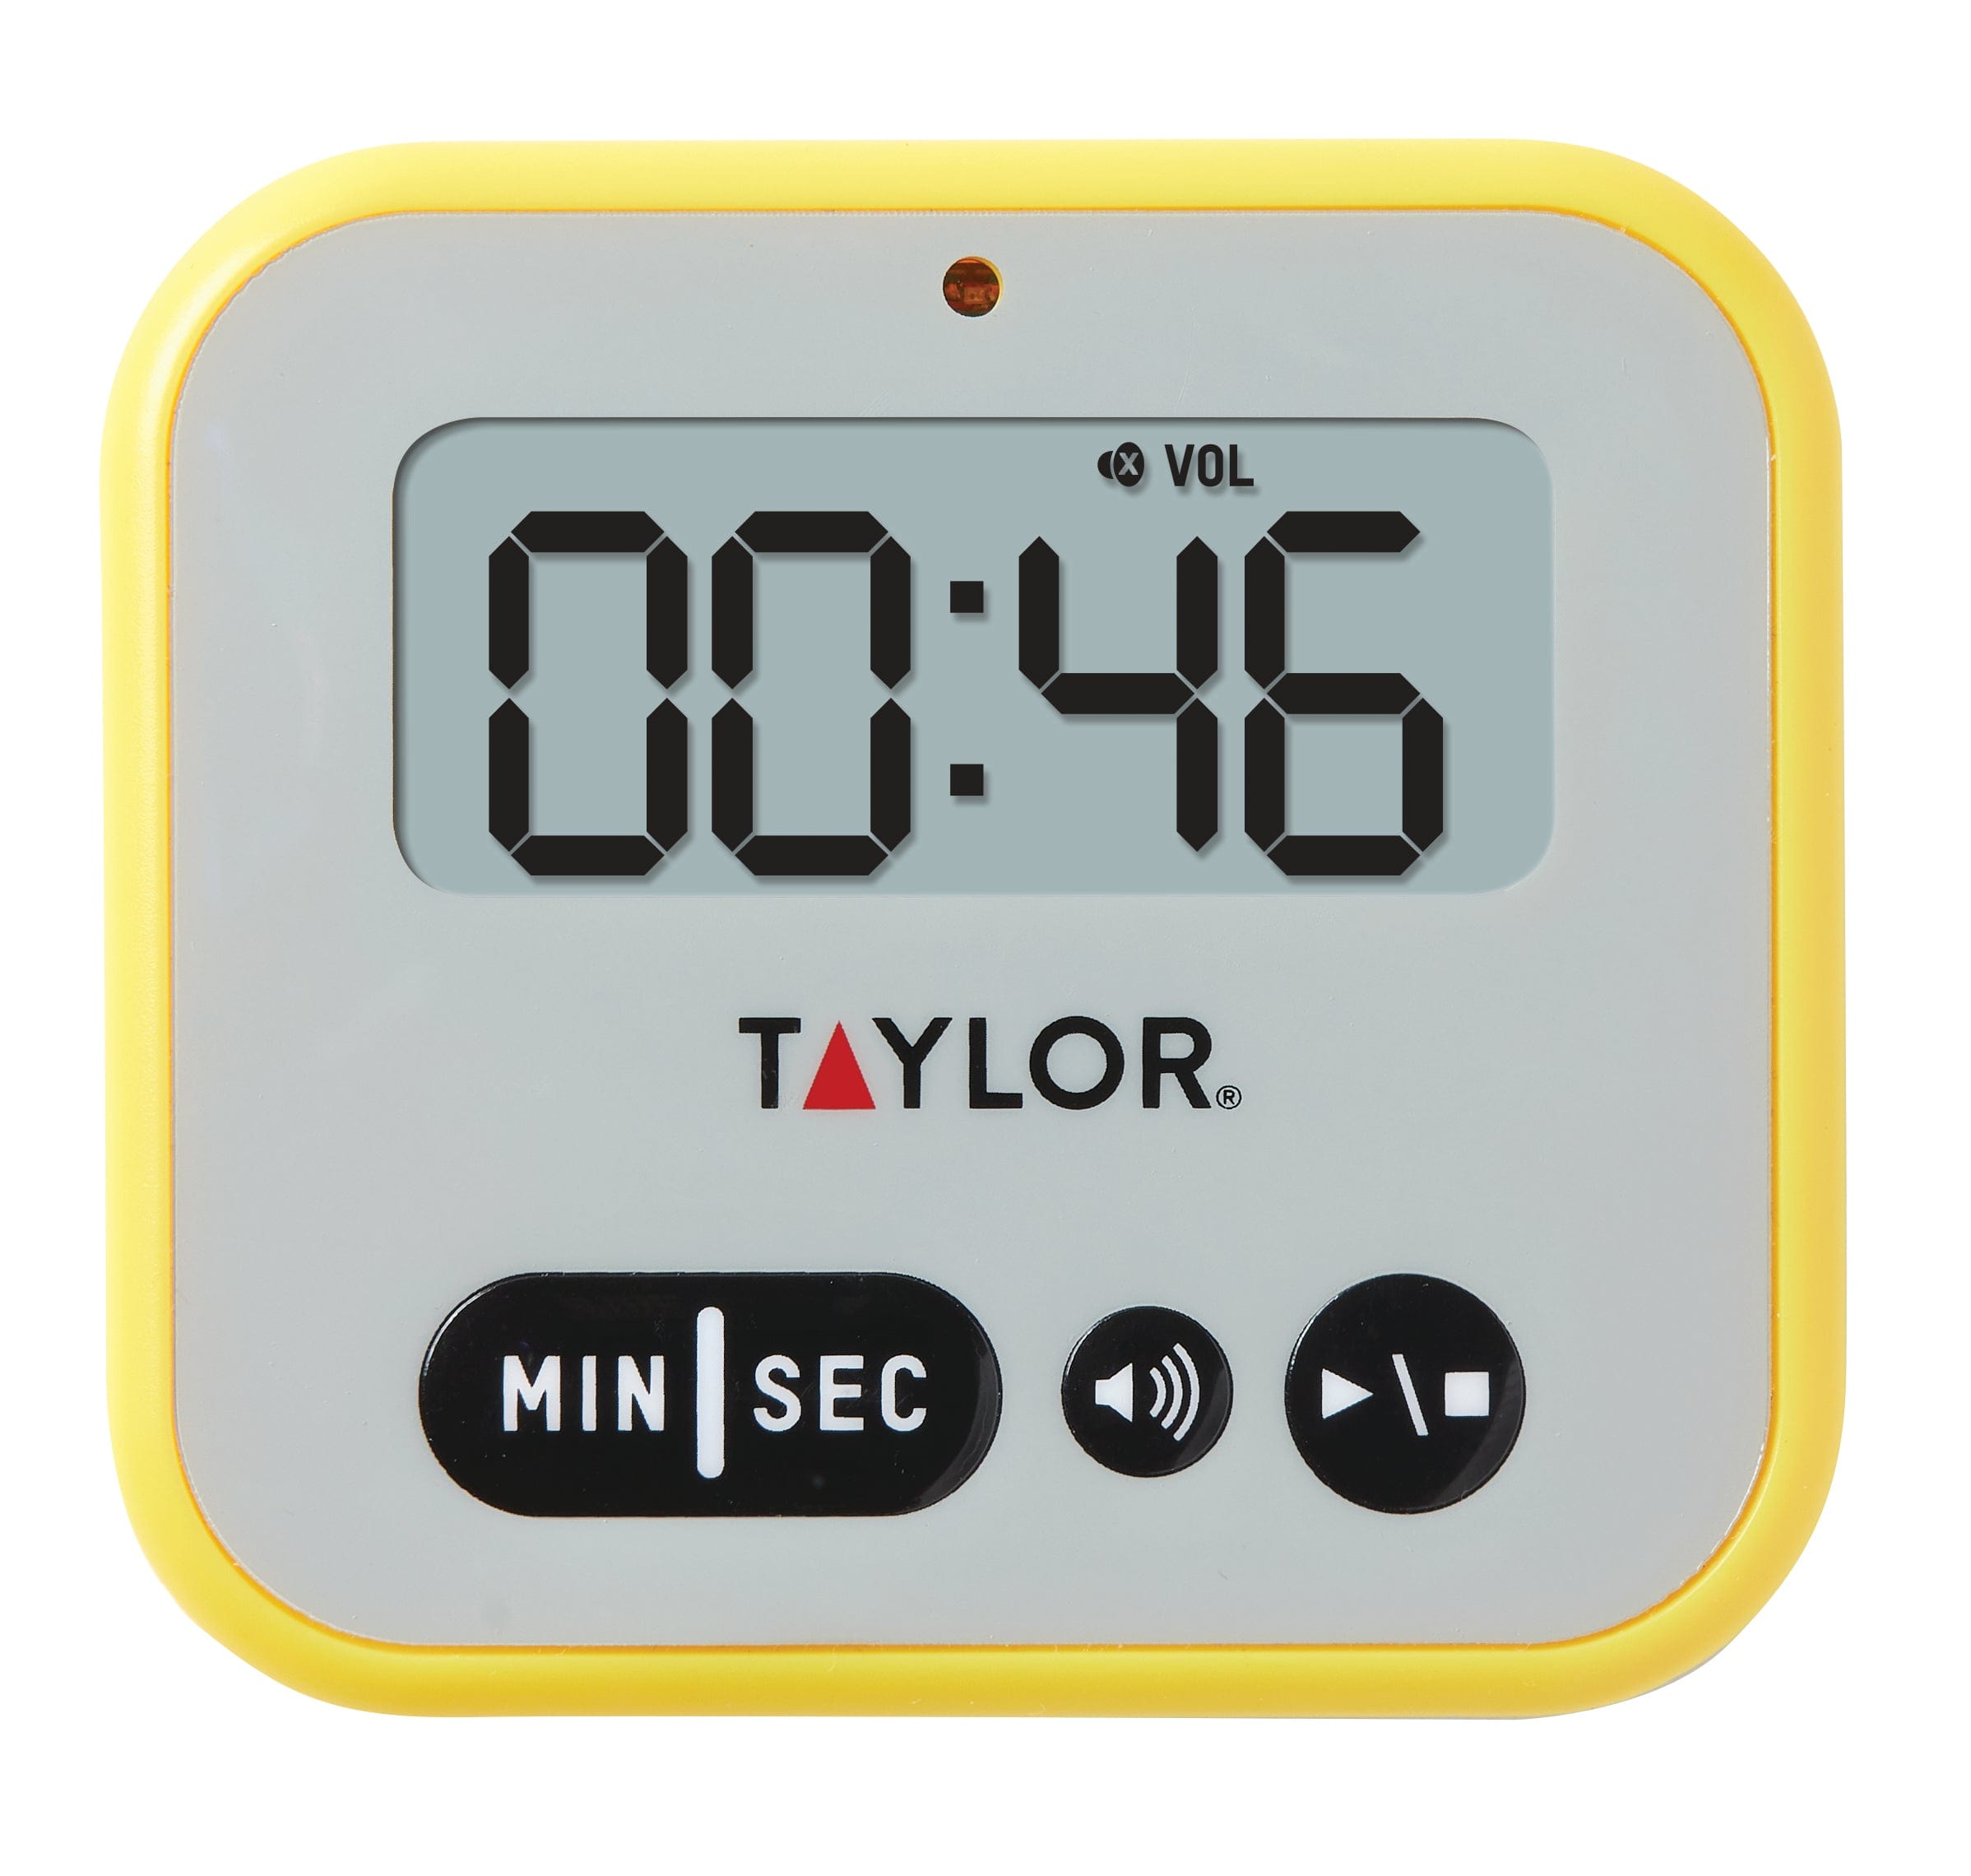 Taylor White Plastic Continuous Ring Digital Timer / Clock - 3 1/2Dia x 2H